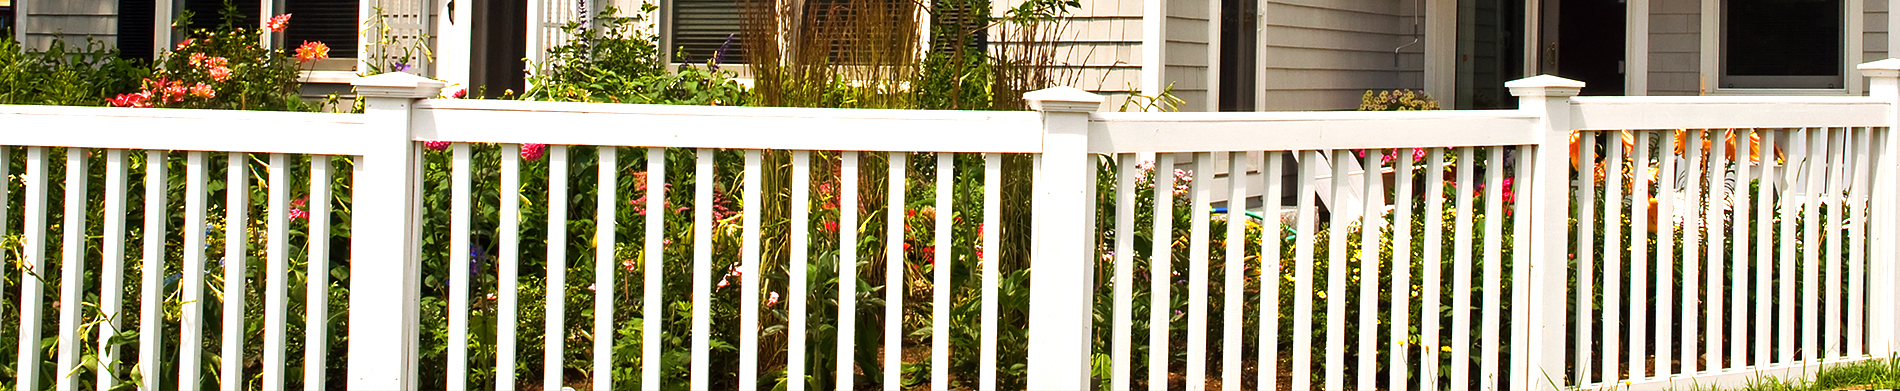 Top 3 Reasons One Should Consider Buying Vinyl Fence Over Other Alternatives